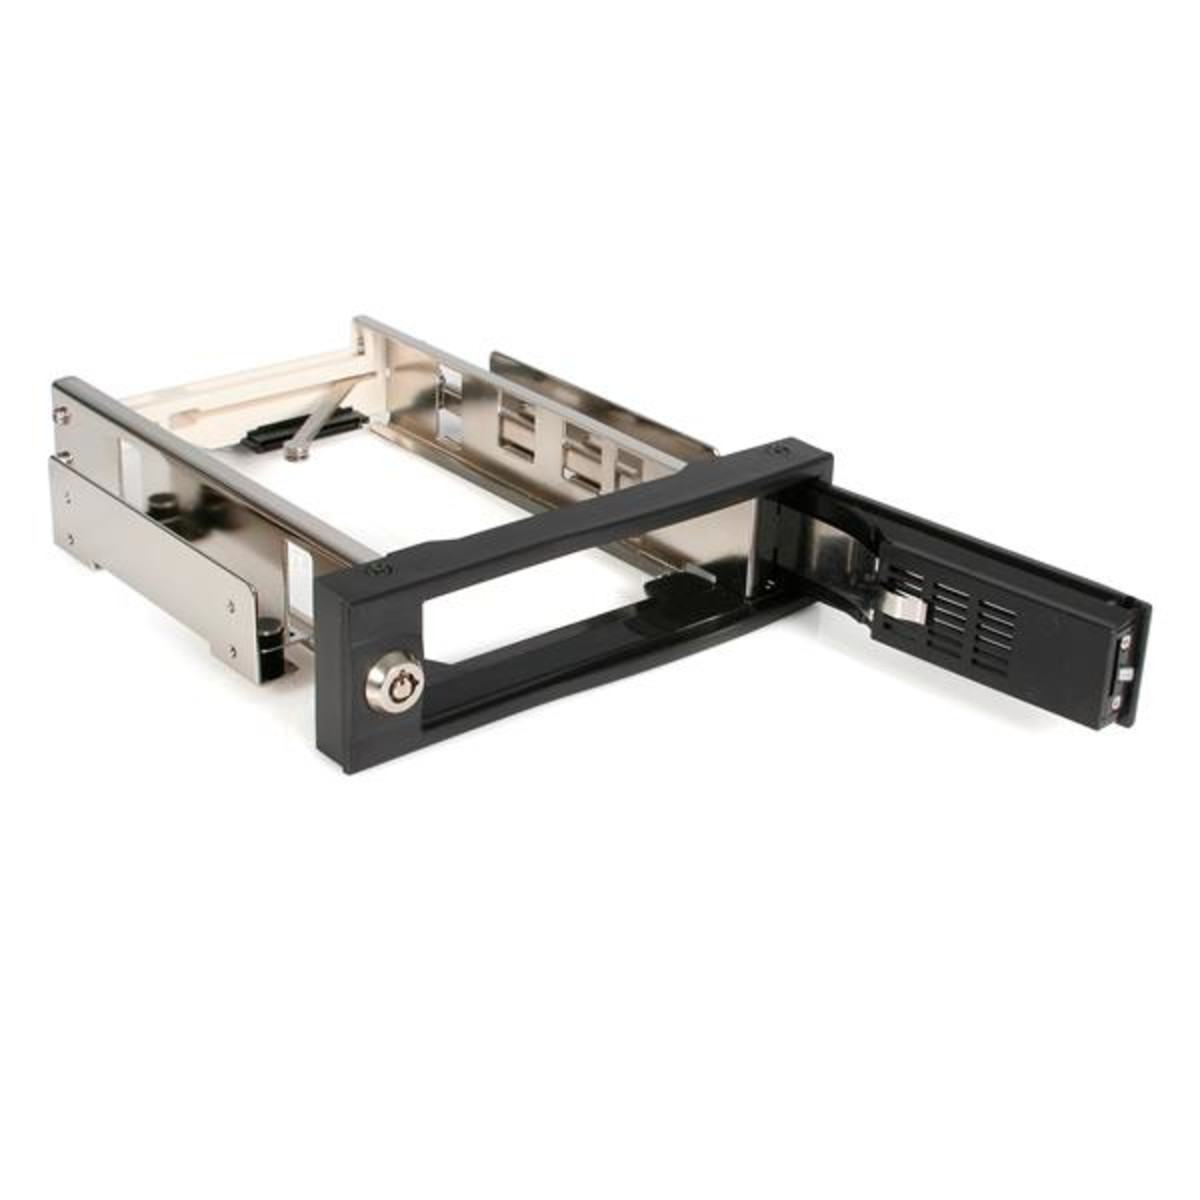 5.25in Trayless Mobile Rack for 3.5in HD